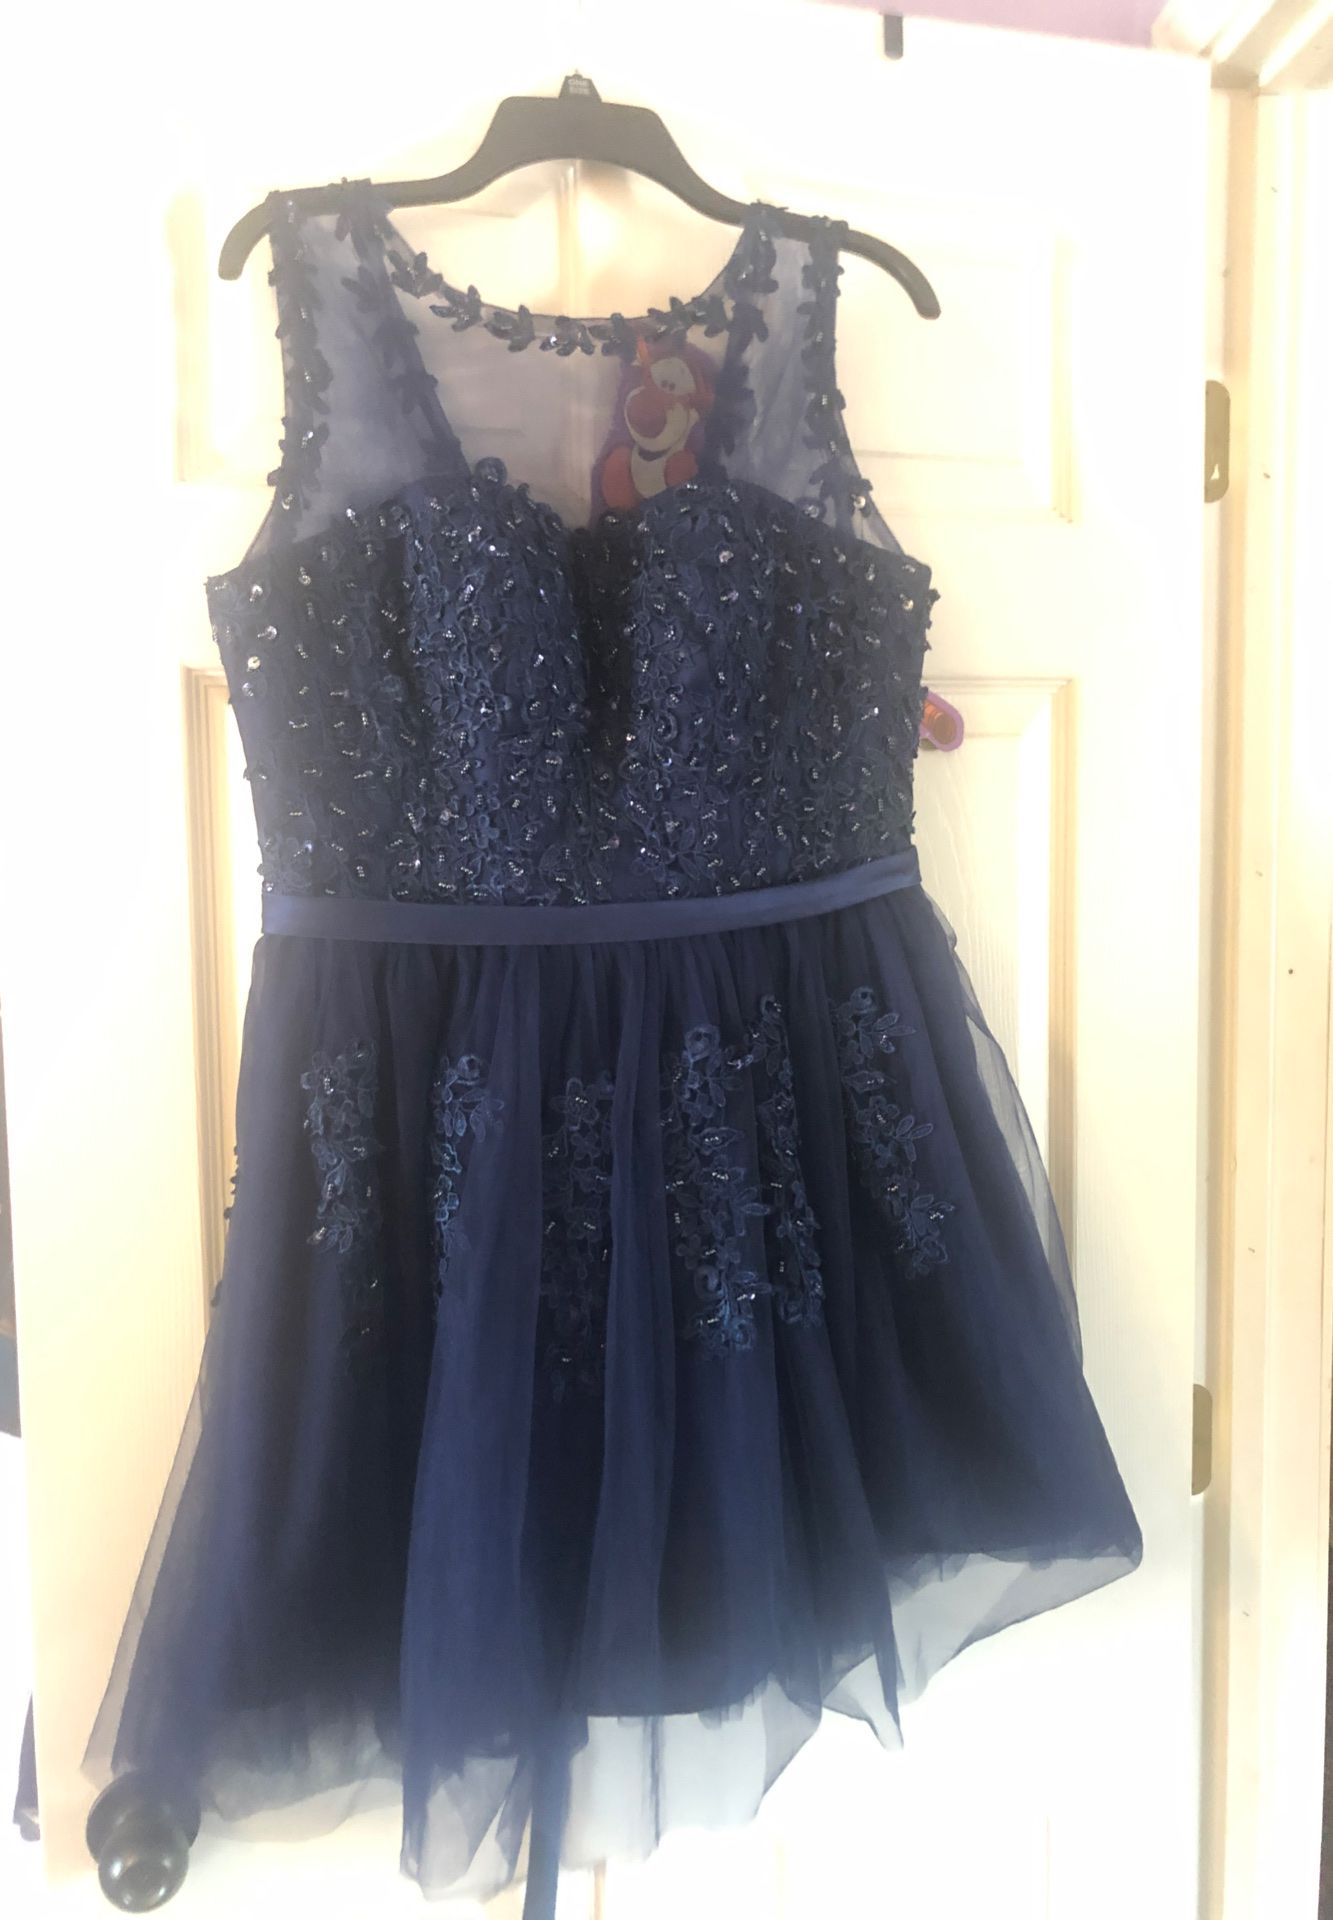 Prom dress size 14 young girl